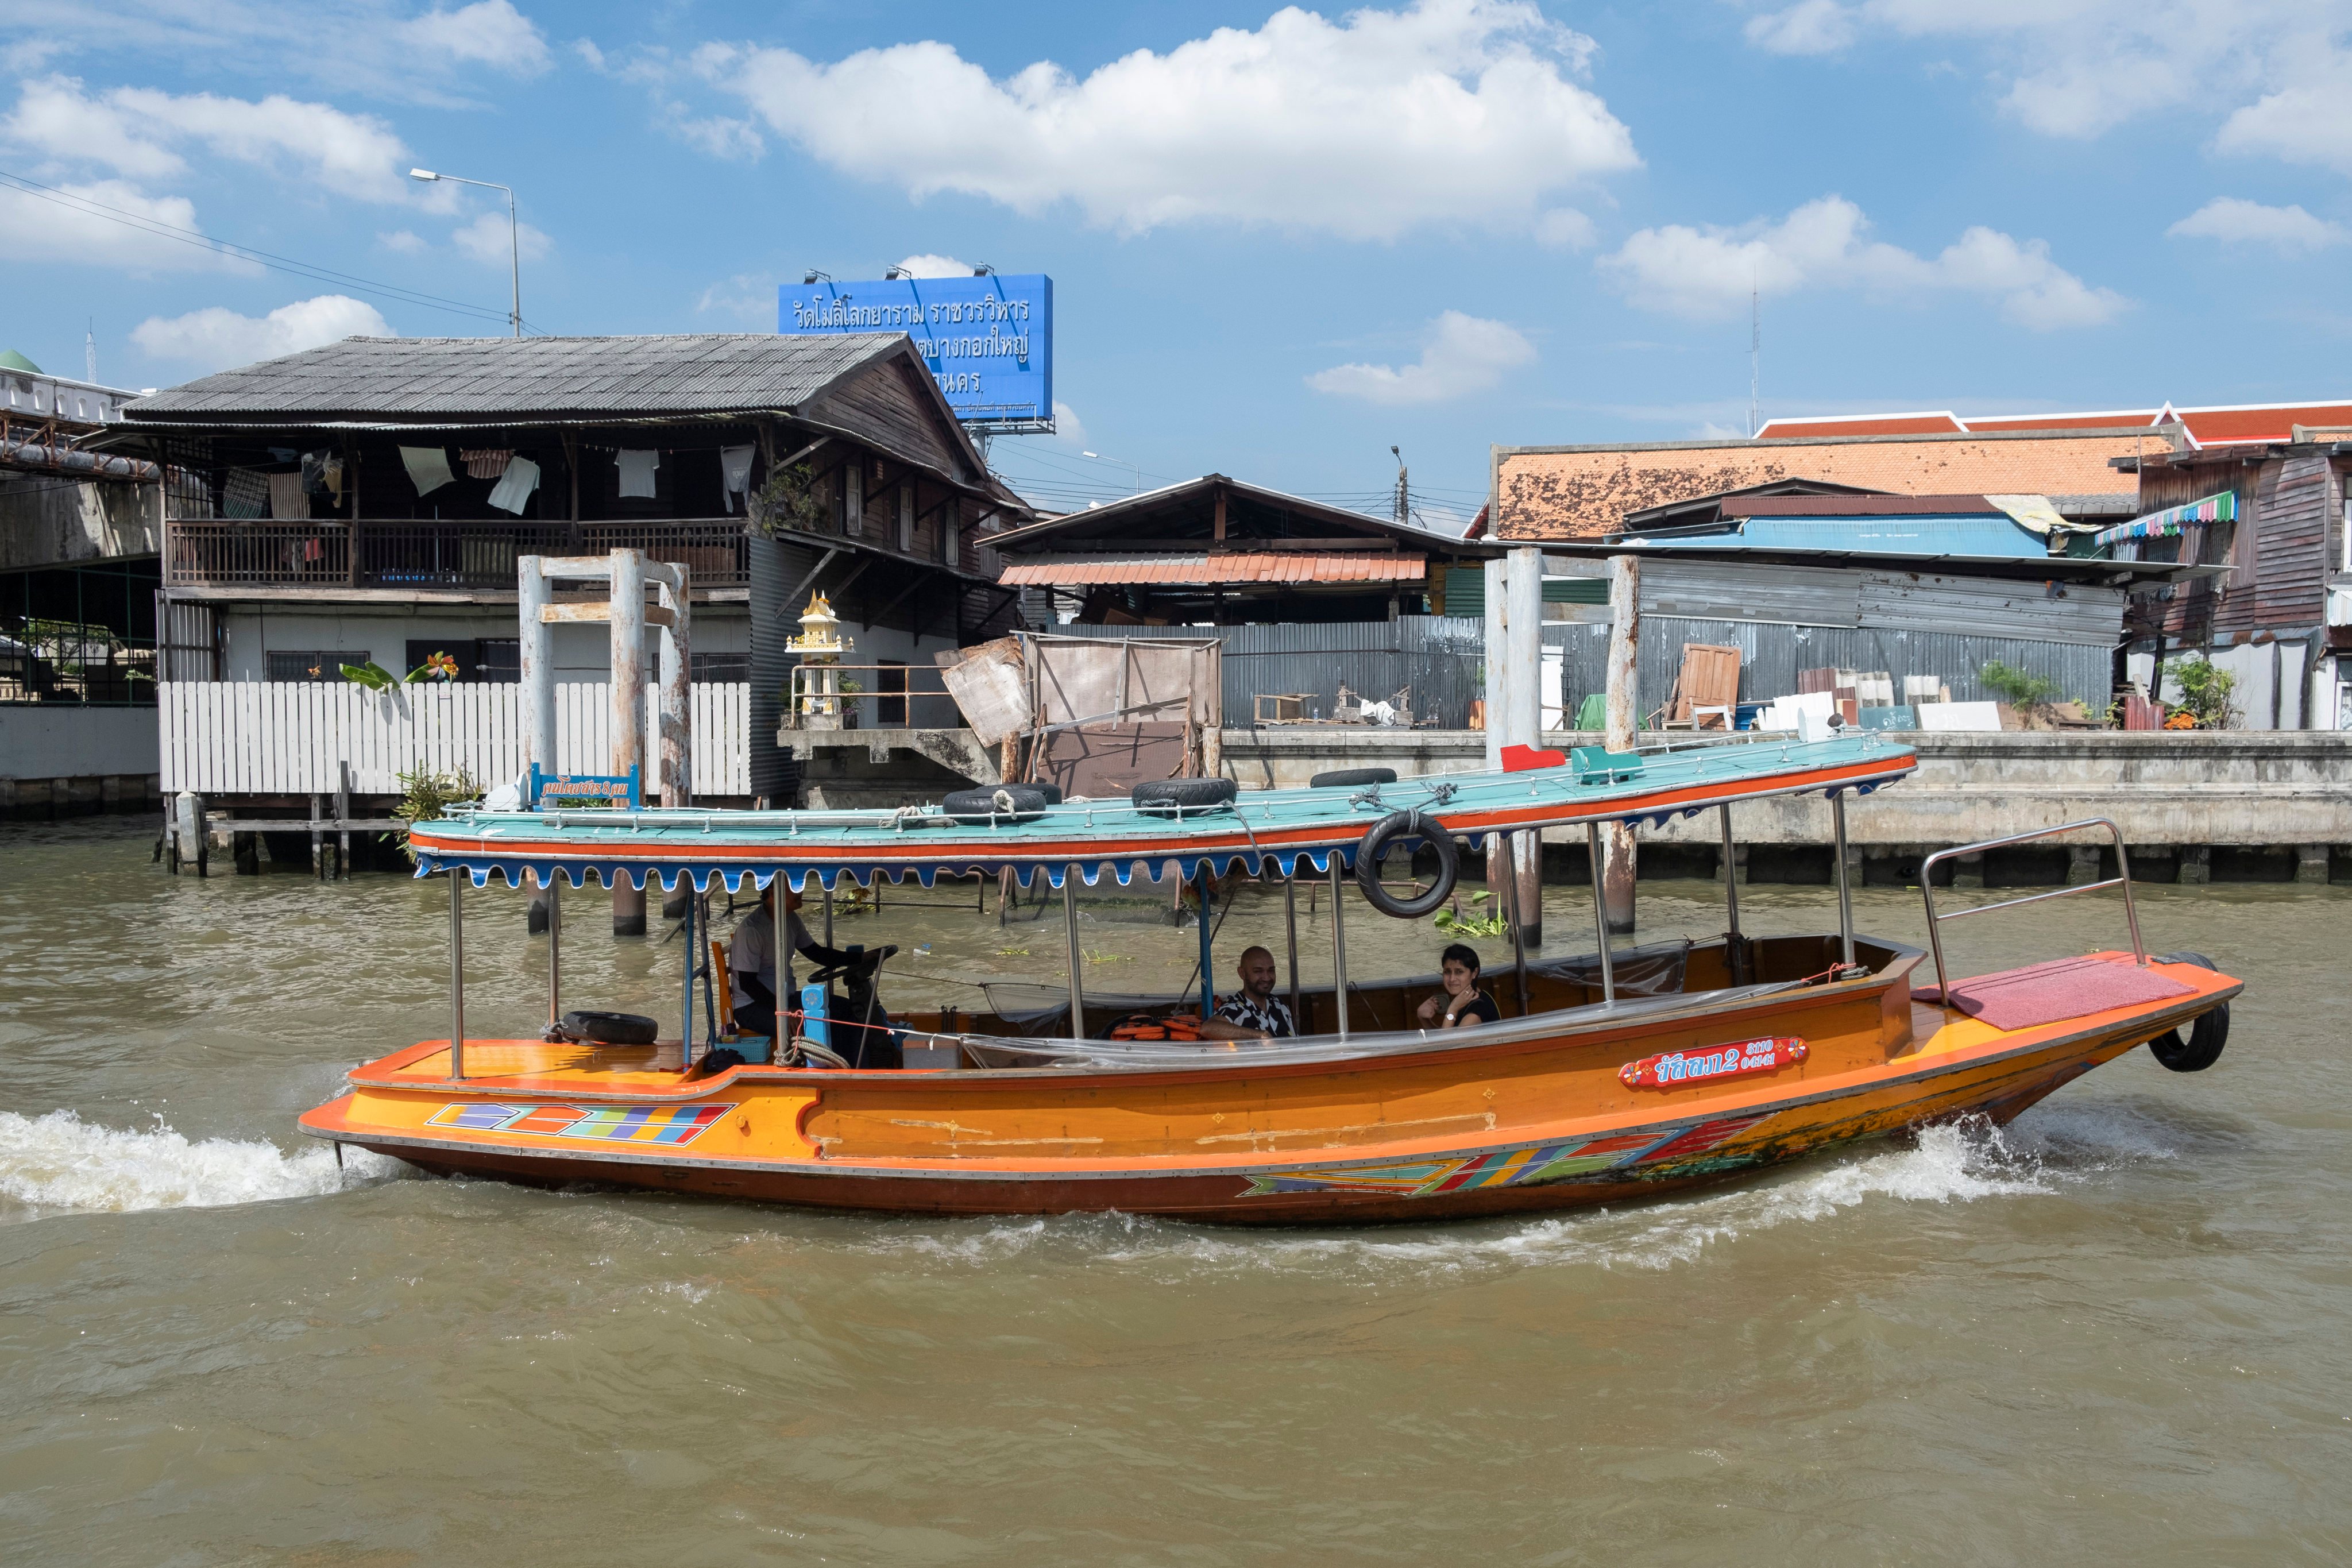 A taxi boat plies the waters of Bangkok. A trip along the canals of the Thai capital’s Thonburi district in a solar-powered one shows the potential for such vessels to reduce noise and air pollution along the city’s waterways. Photo: Oliver Raw